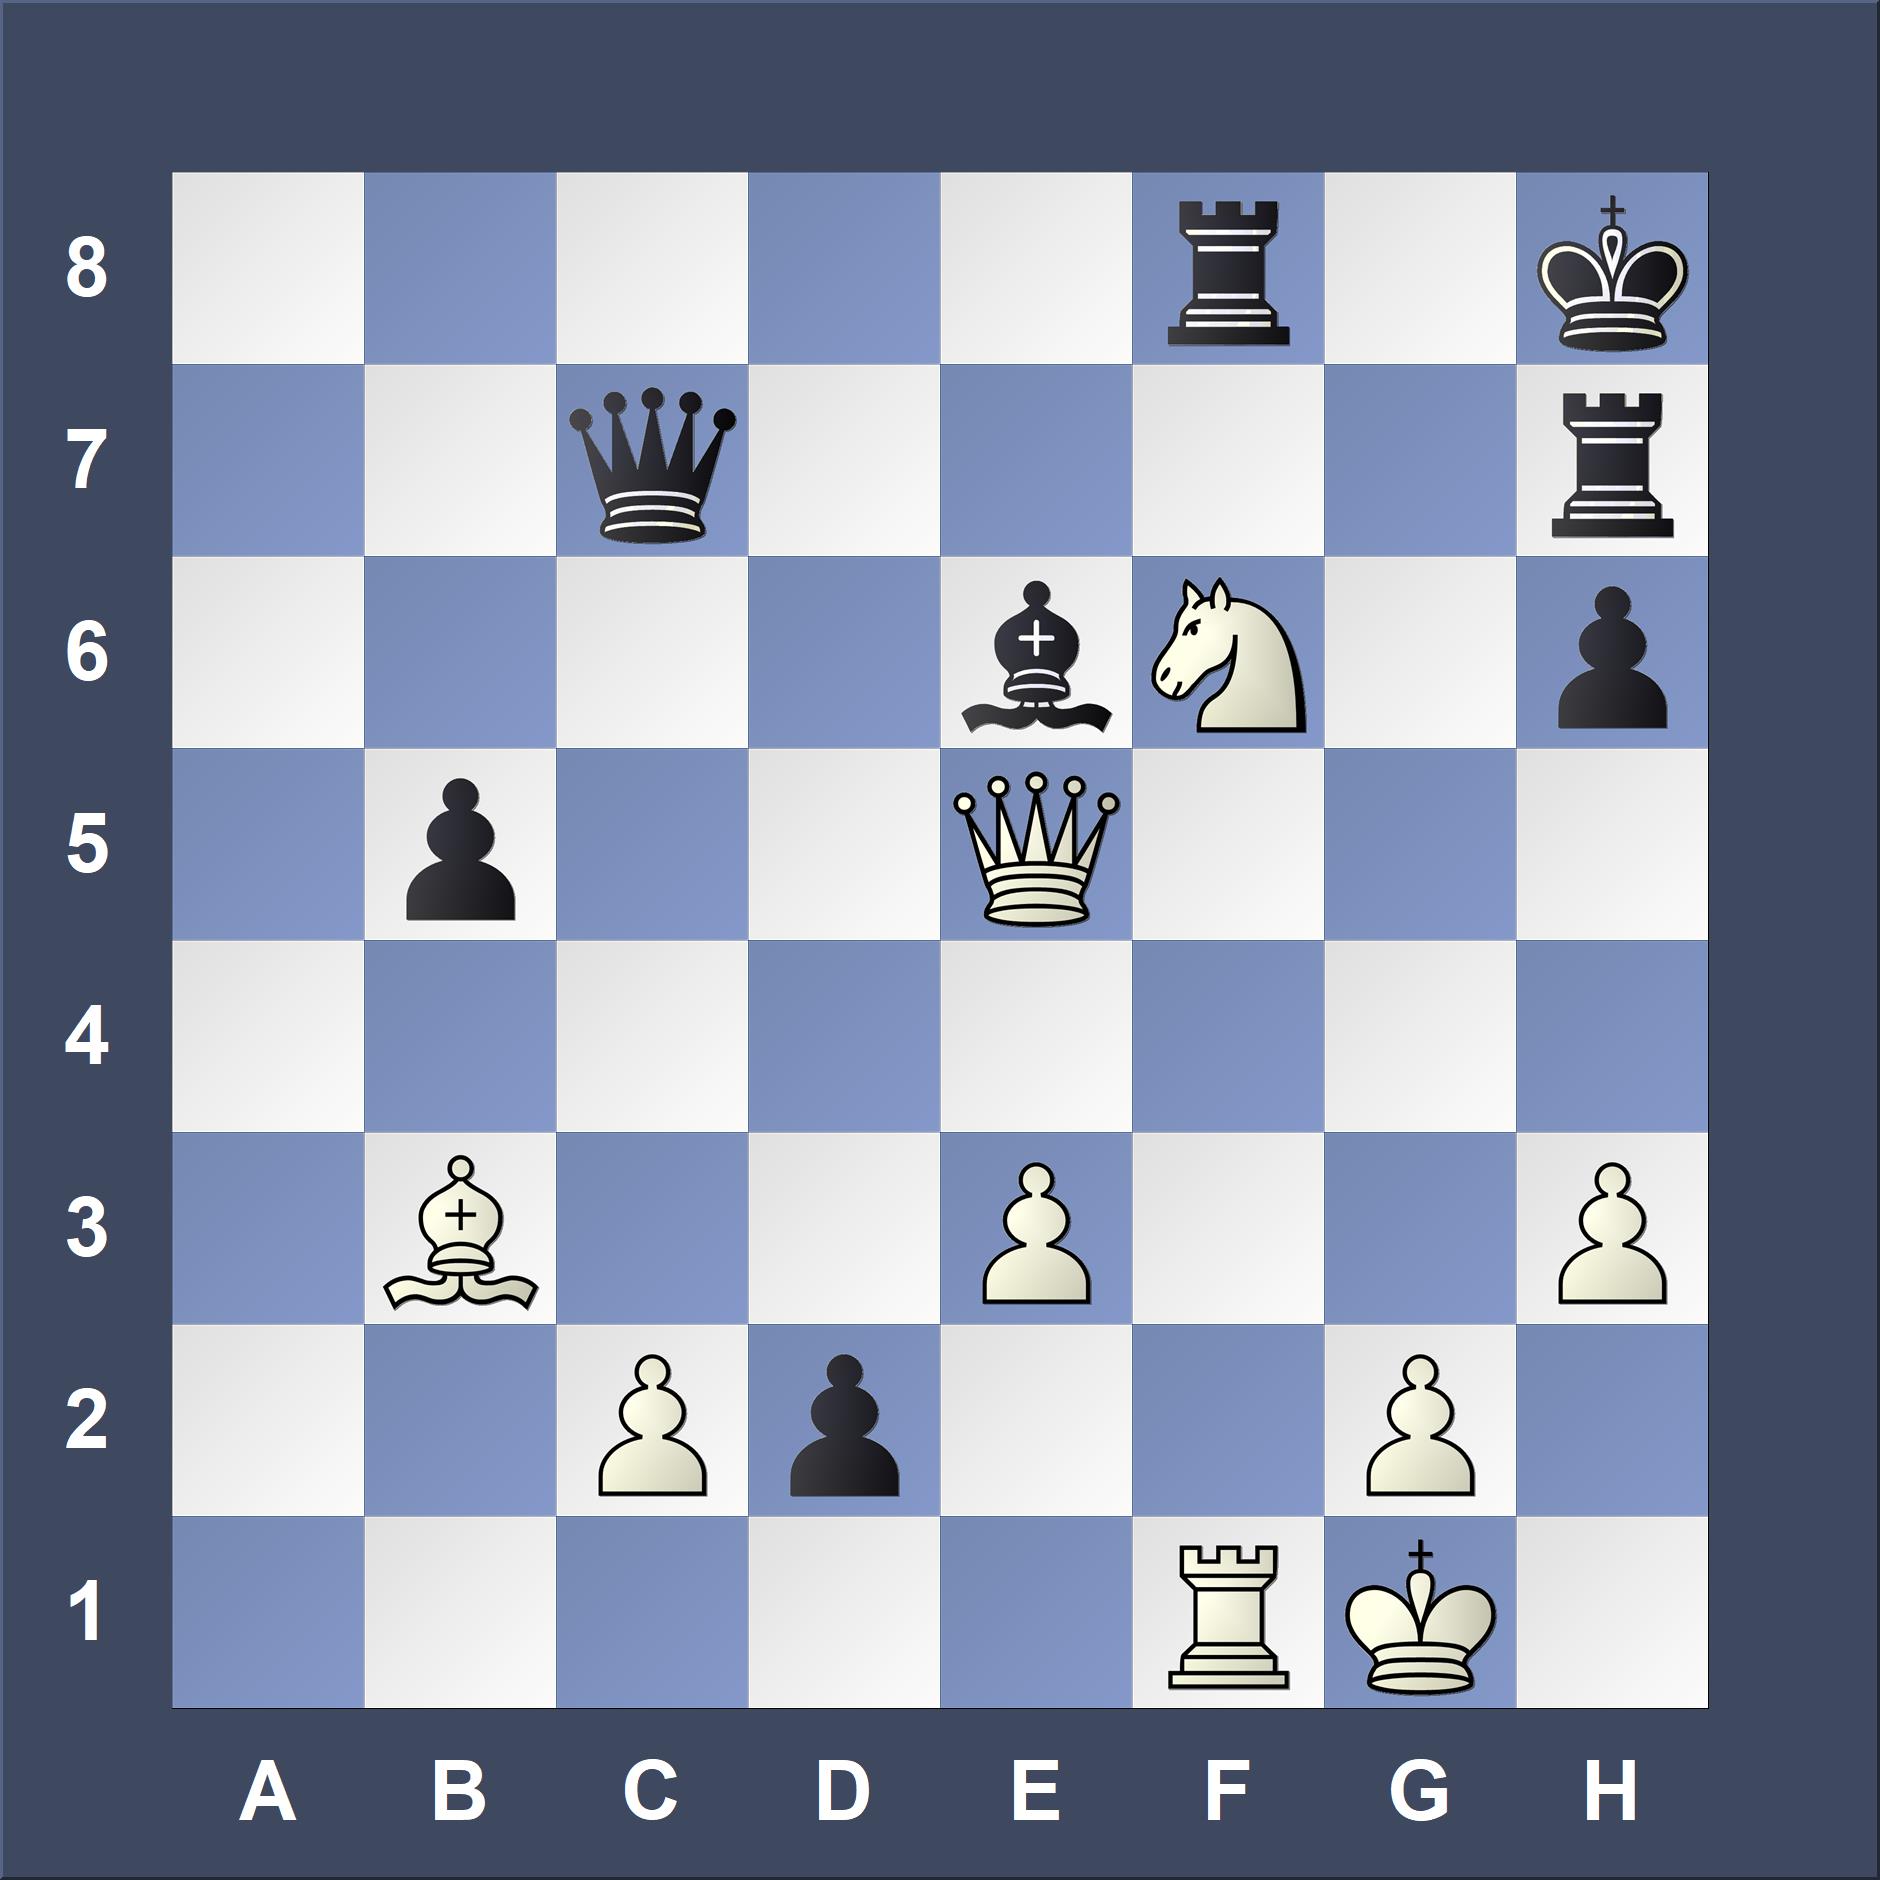 October 2018 Chess Puzzle Answer Key